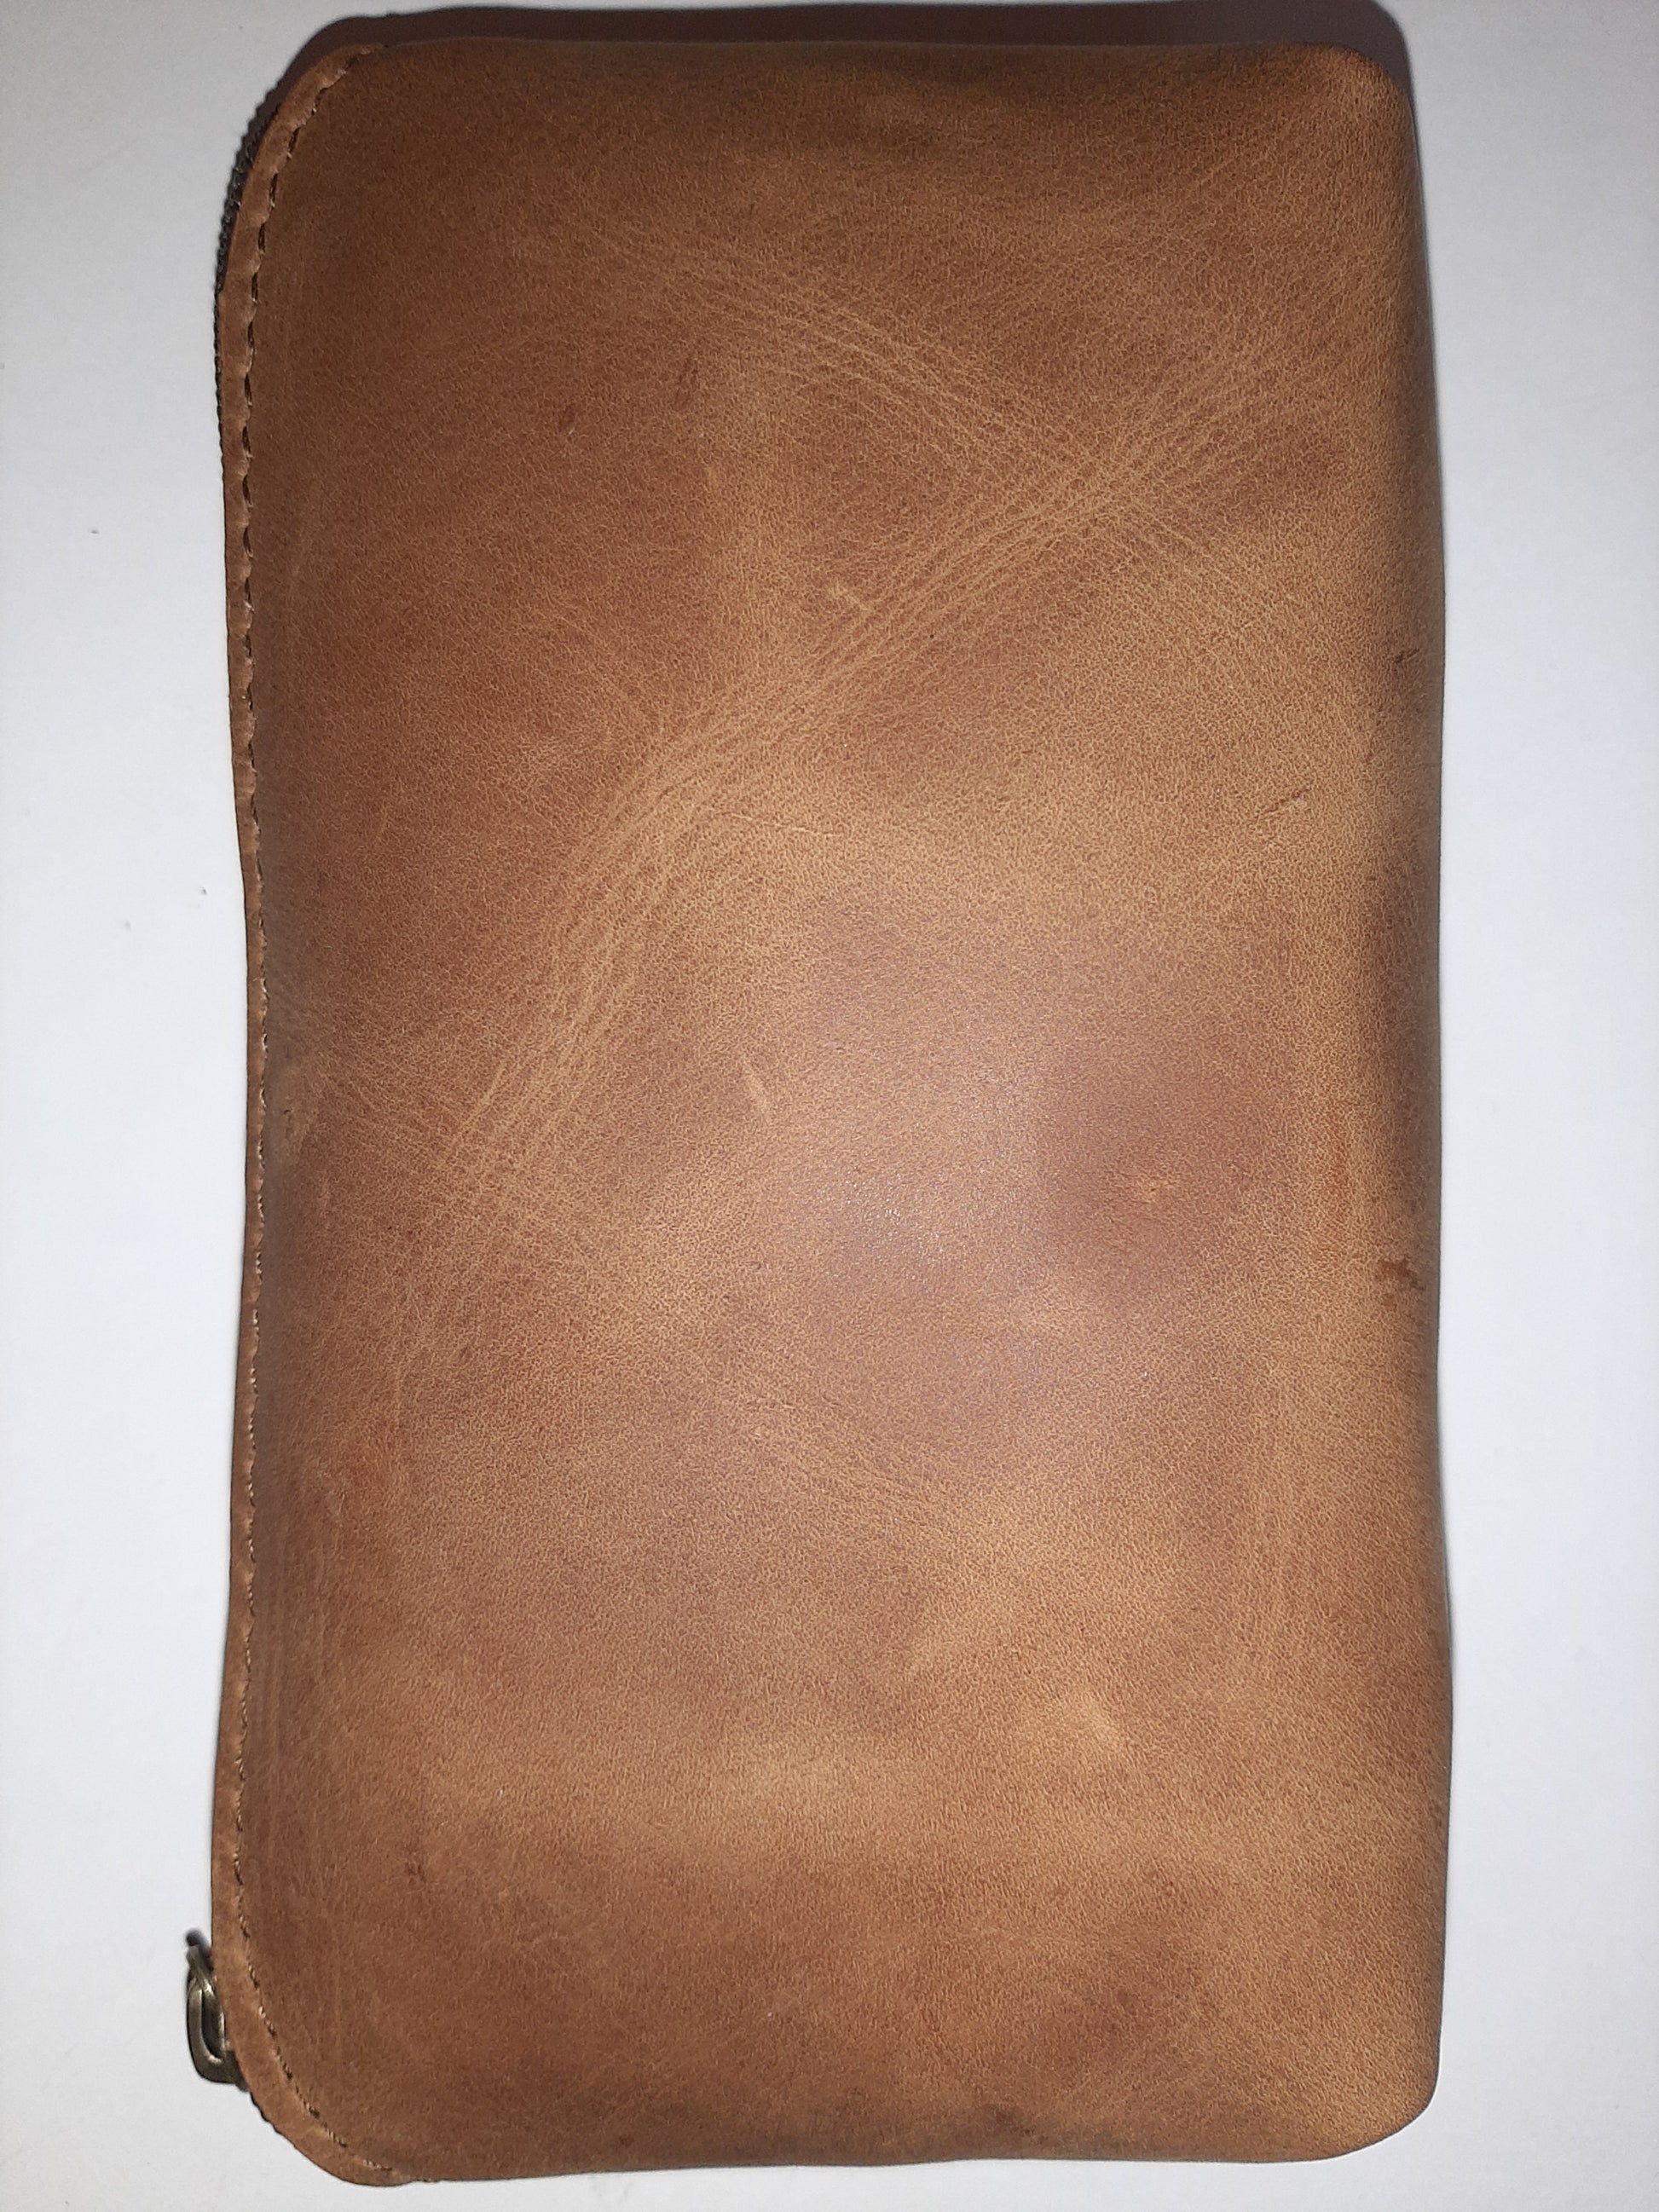 Beautiful genuine leather hand made makeup purse in brown tan cow hide 